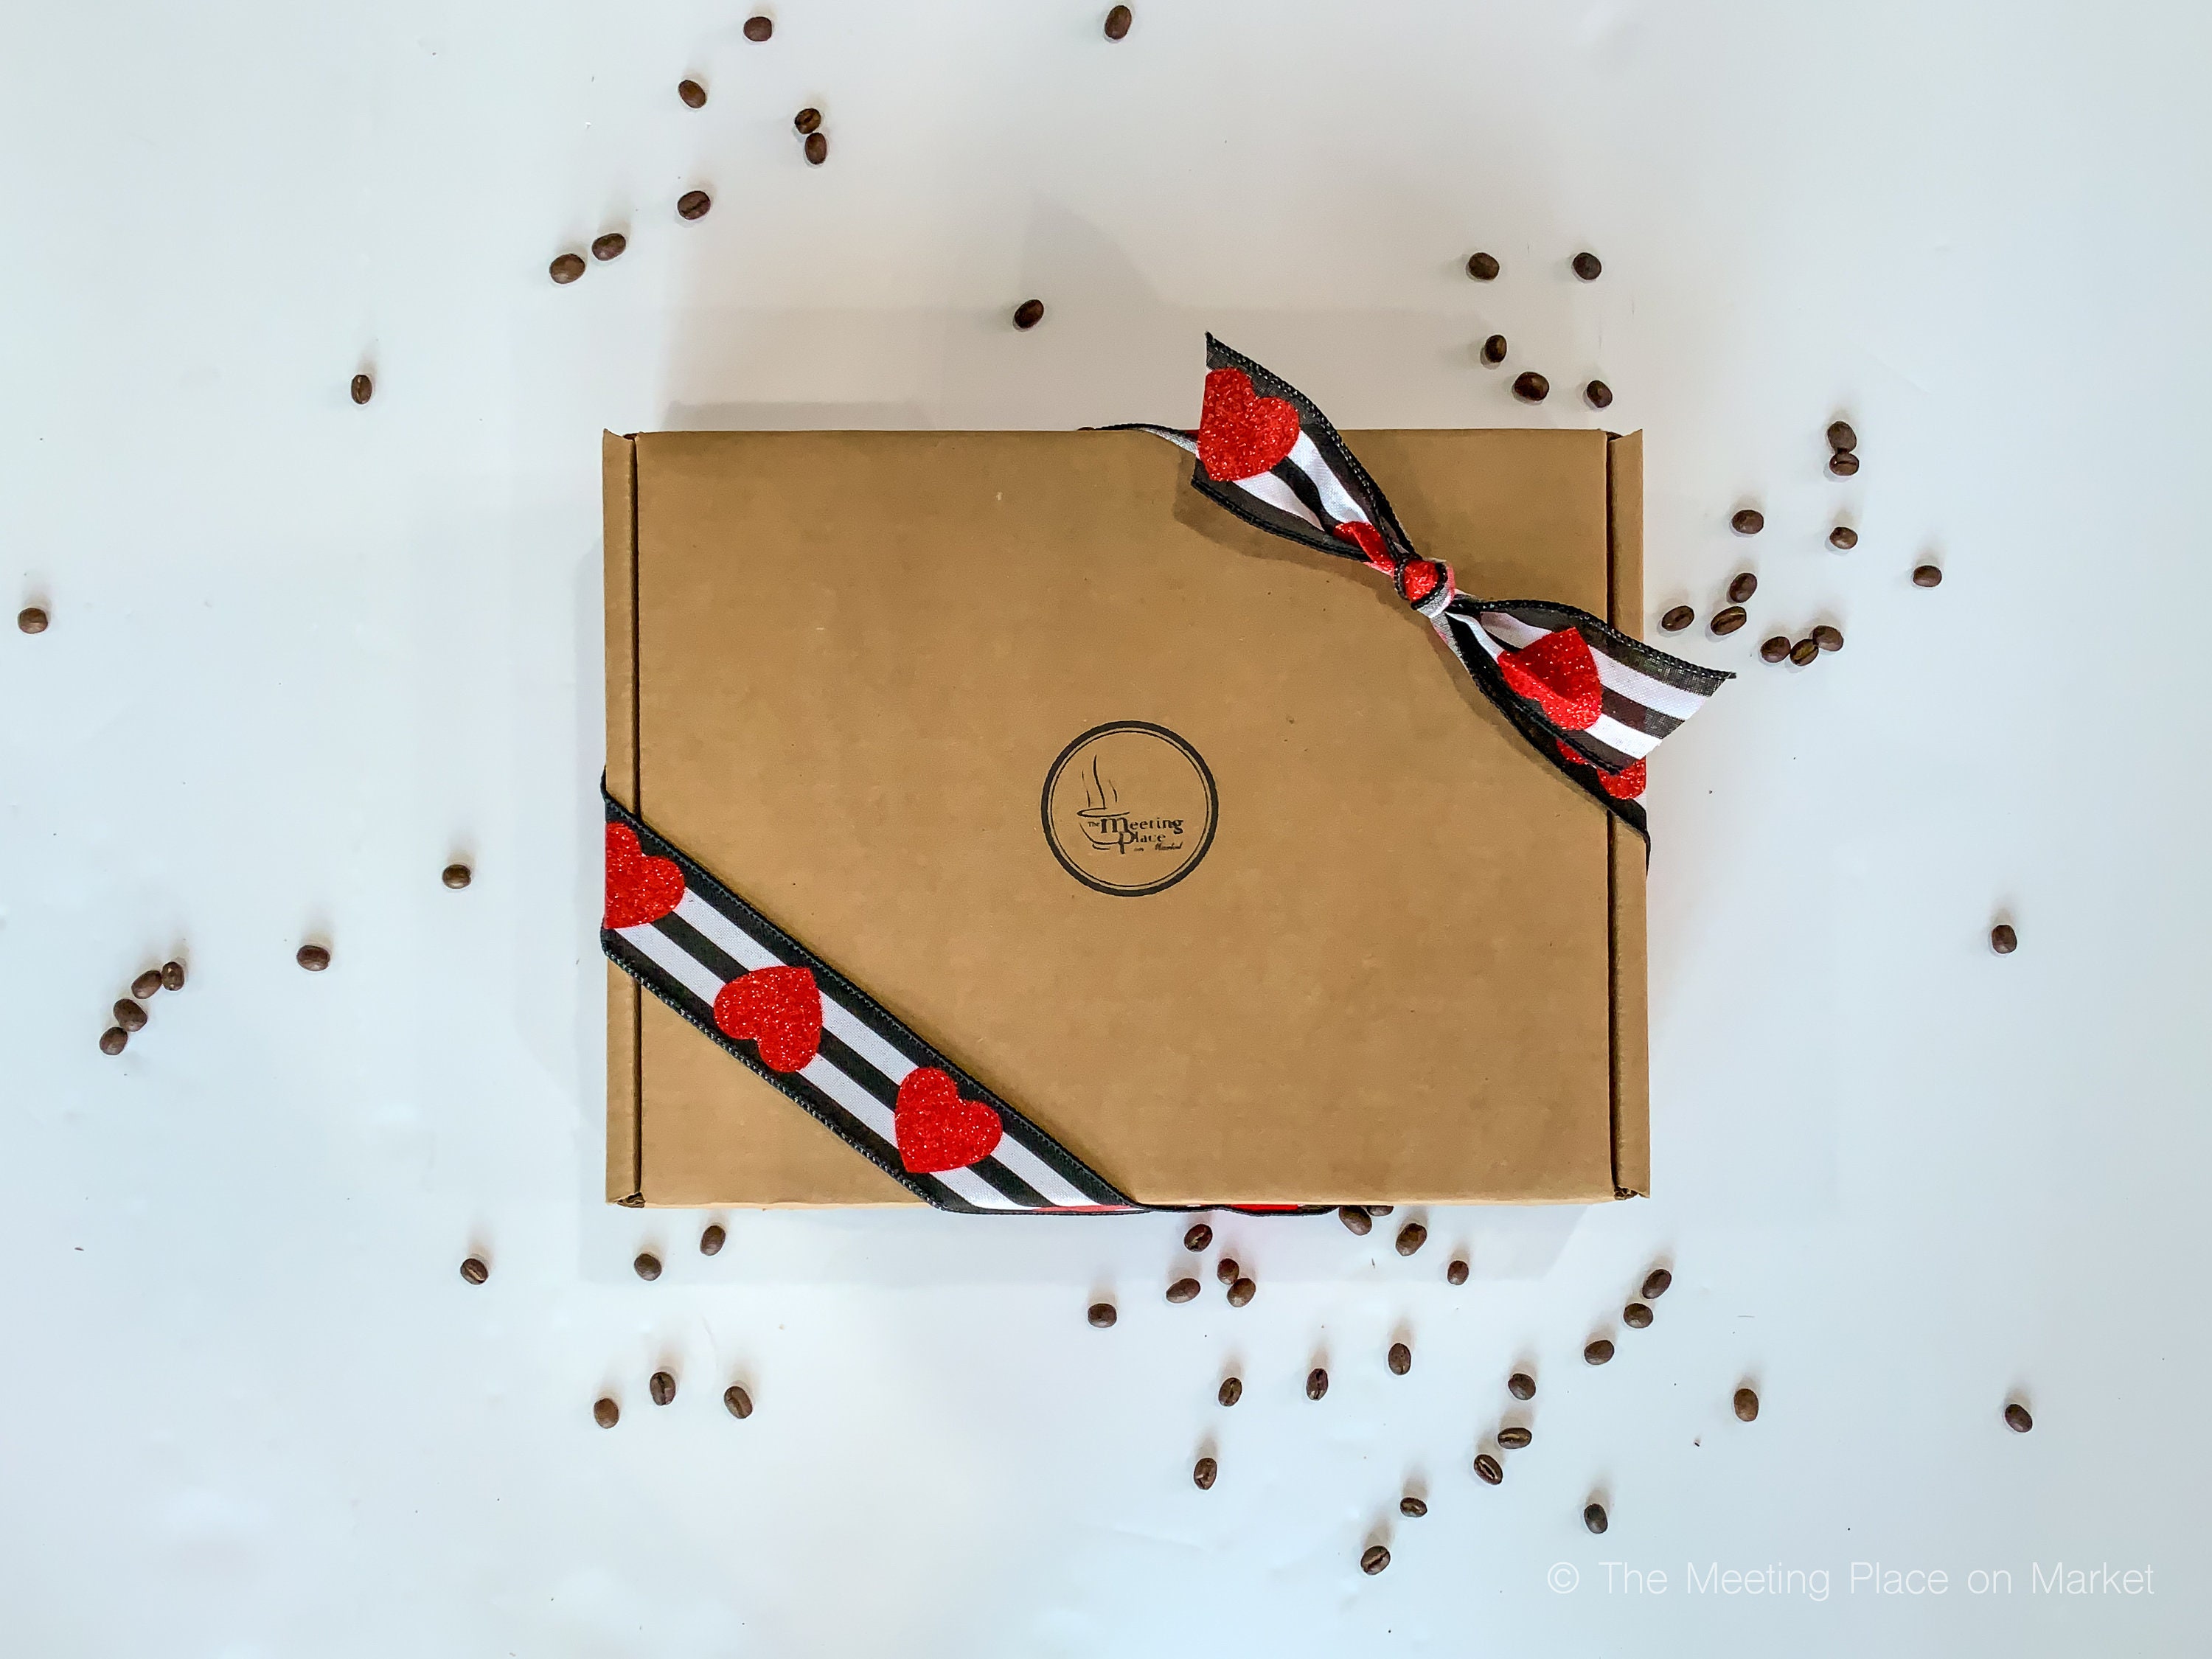 Date Night Coffee Gift Box, Pour Over Coffee